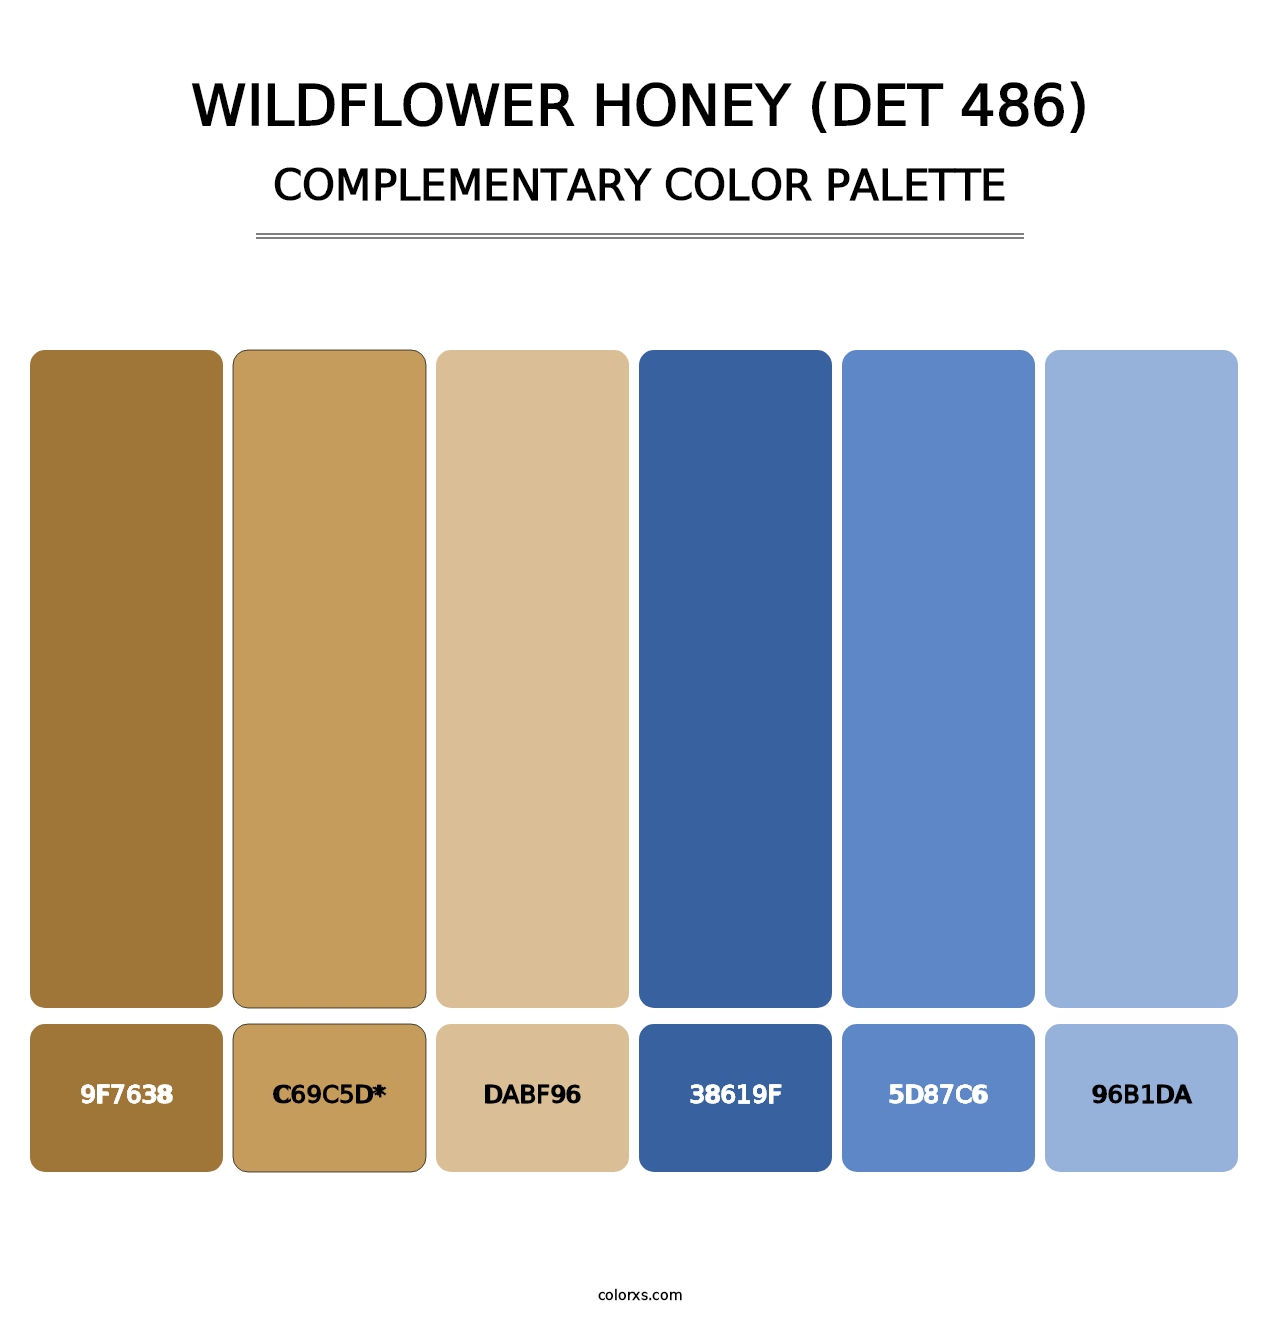 Wildflower Honey (DET 486) - Complementary Color Palette